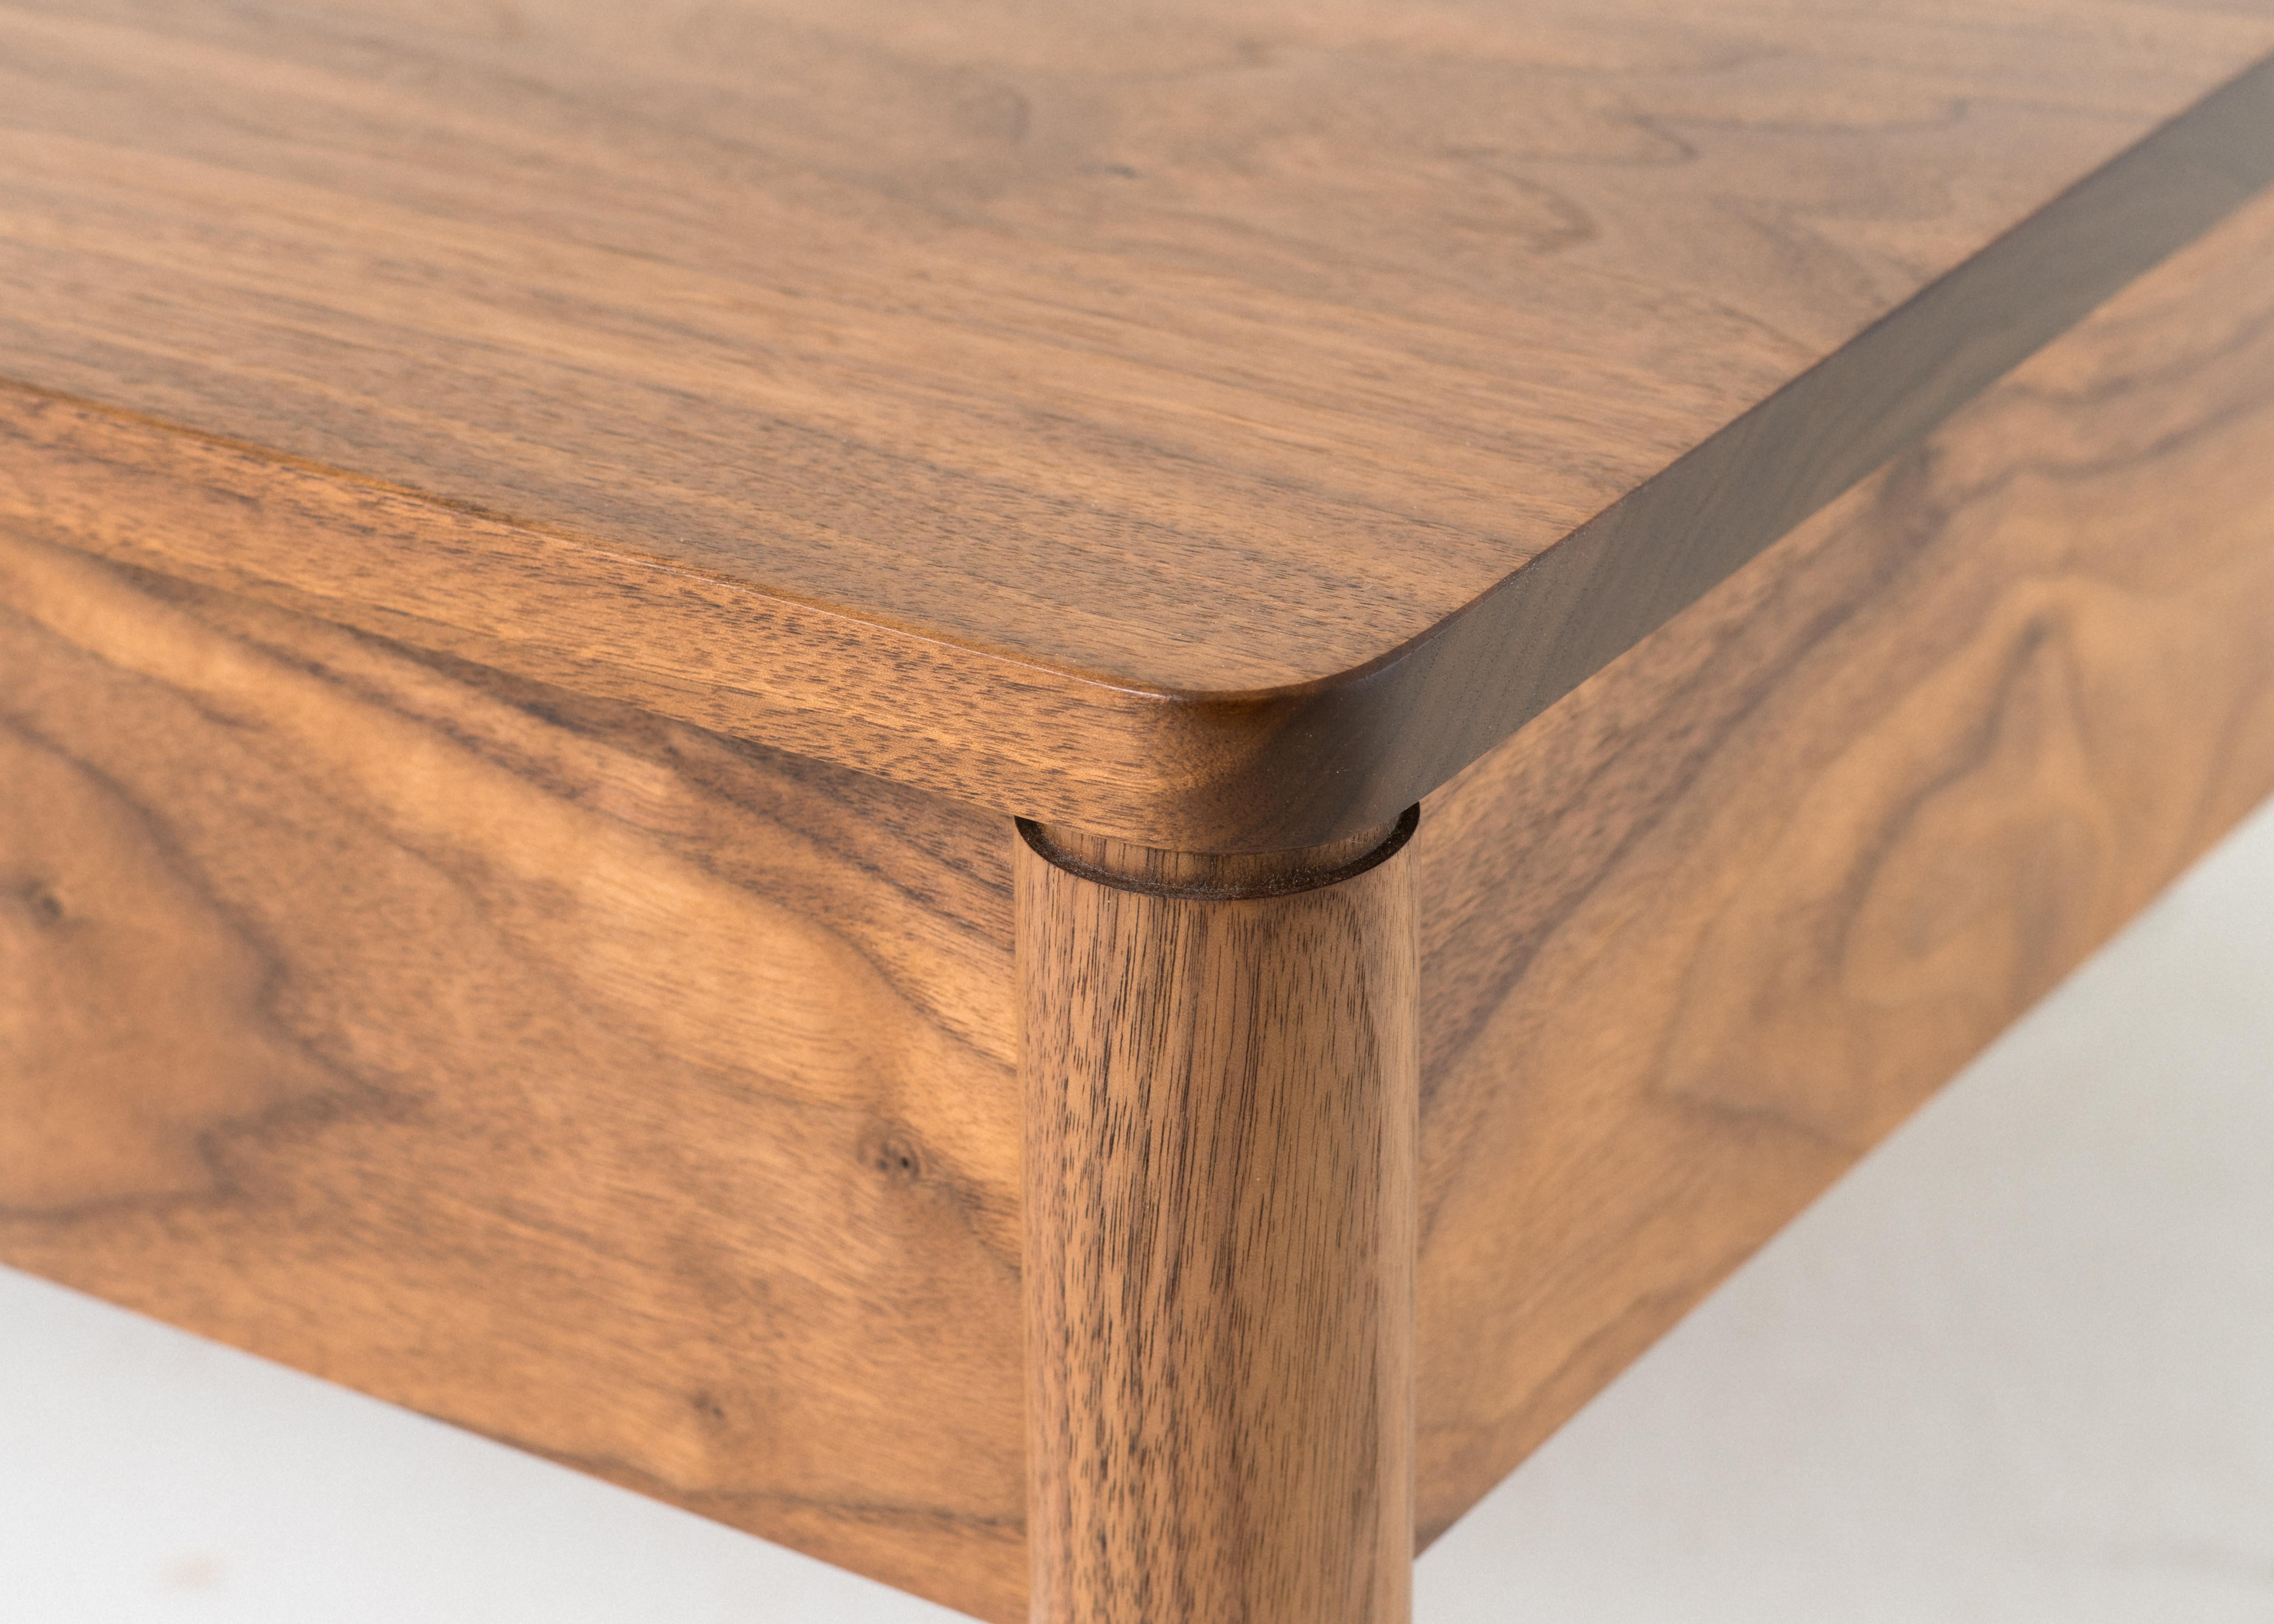 Joinery Calvin Low Table Medium, Handcrafted Solid Wood Coffee Table For Sale